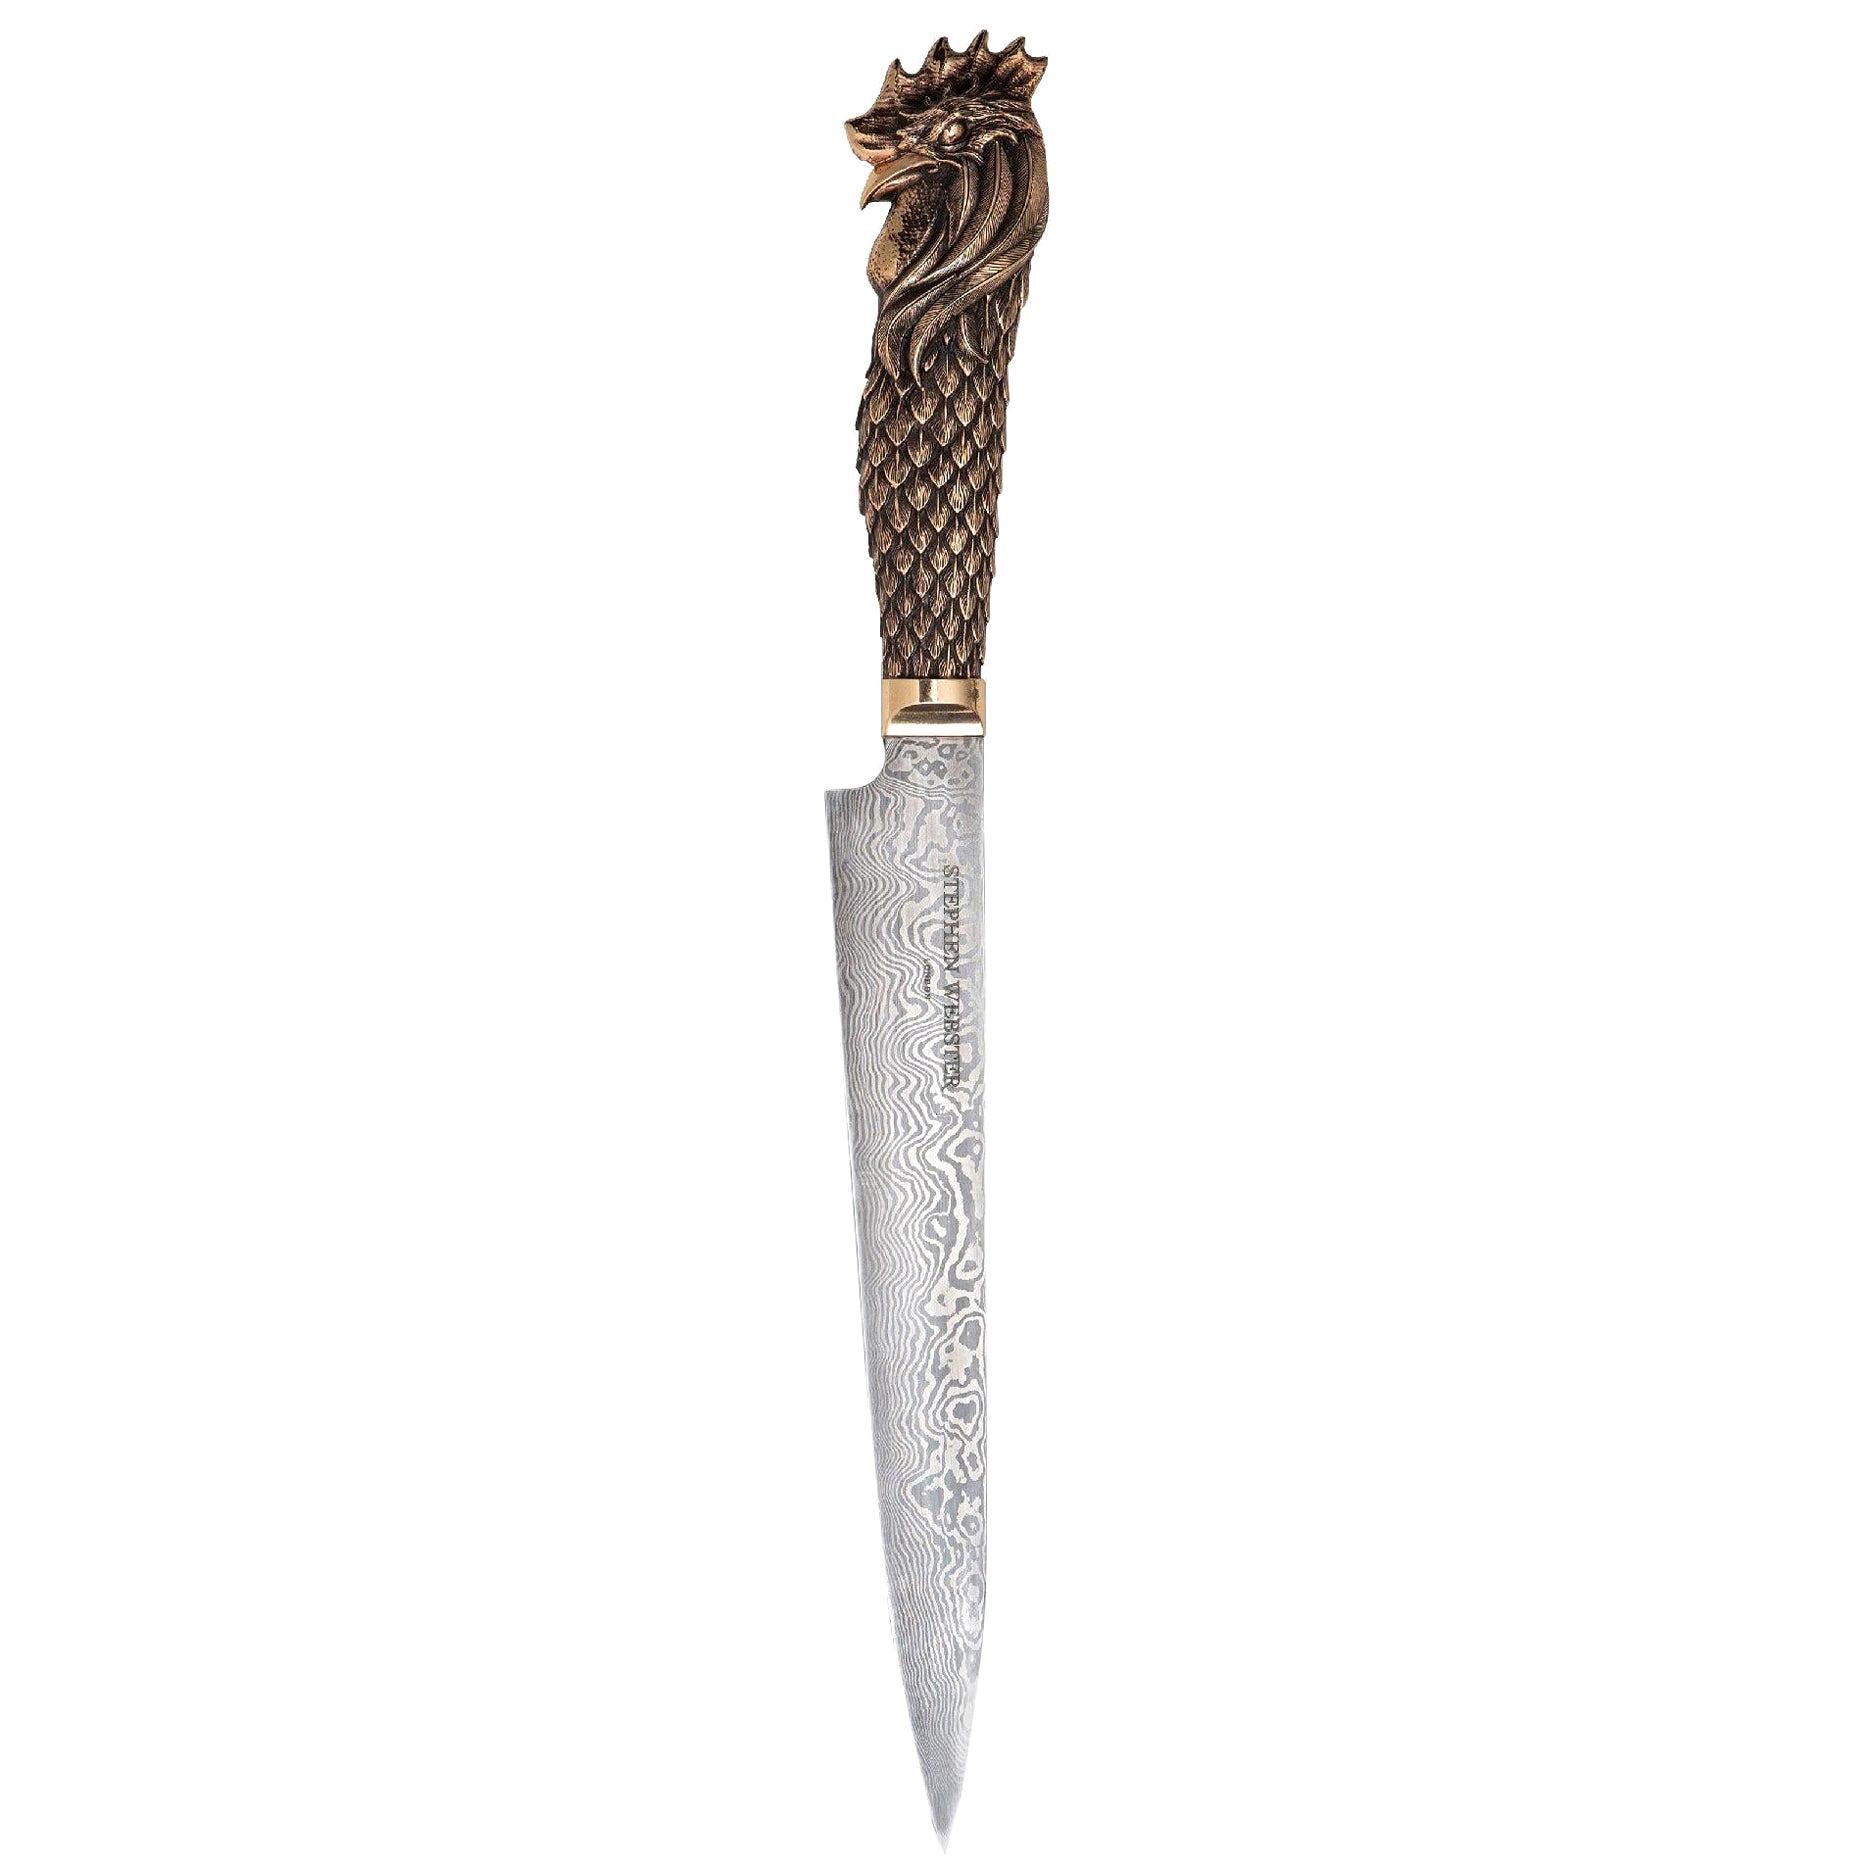 Stephen Webster Beasts Chef Rooster Knife with Damascus Steel Blade For Sale